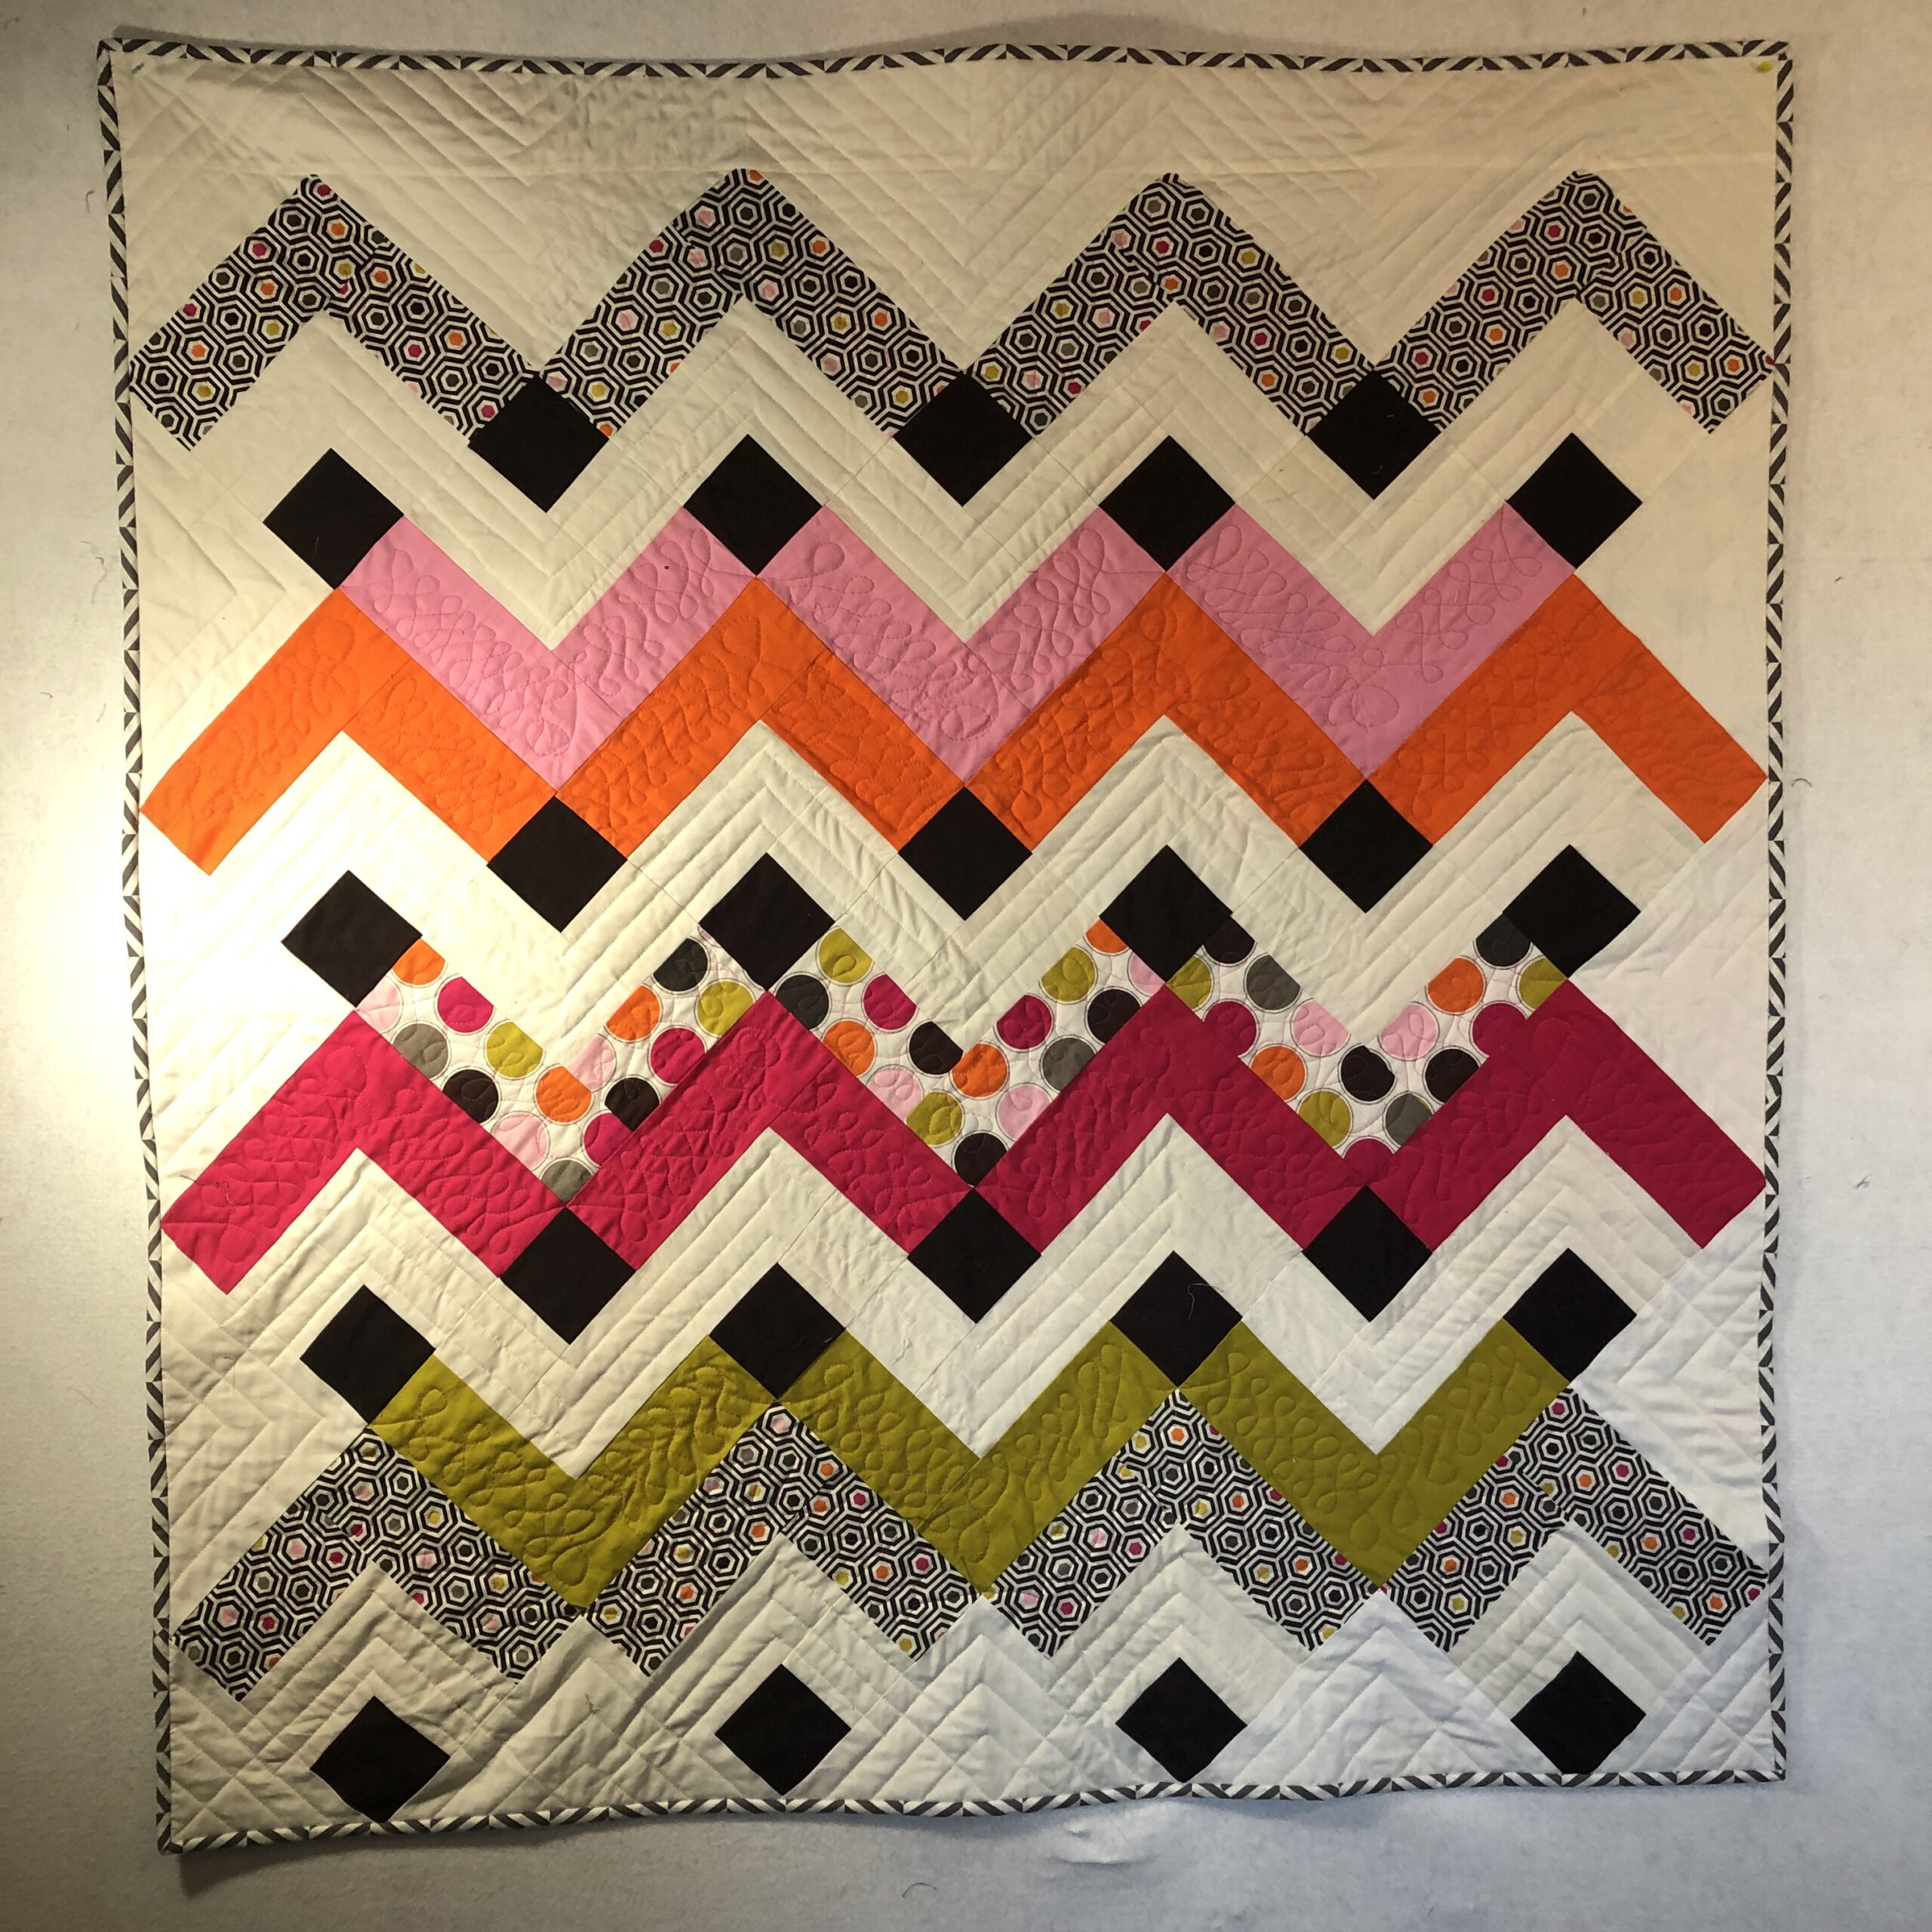 Thrive Quilt finished!